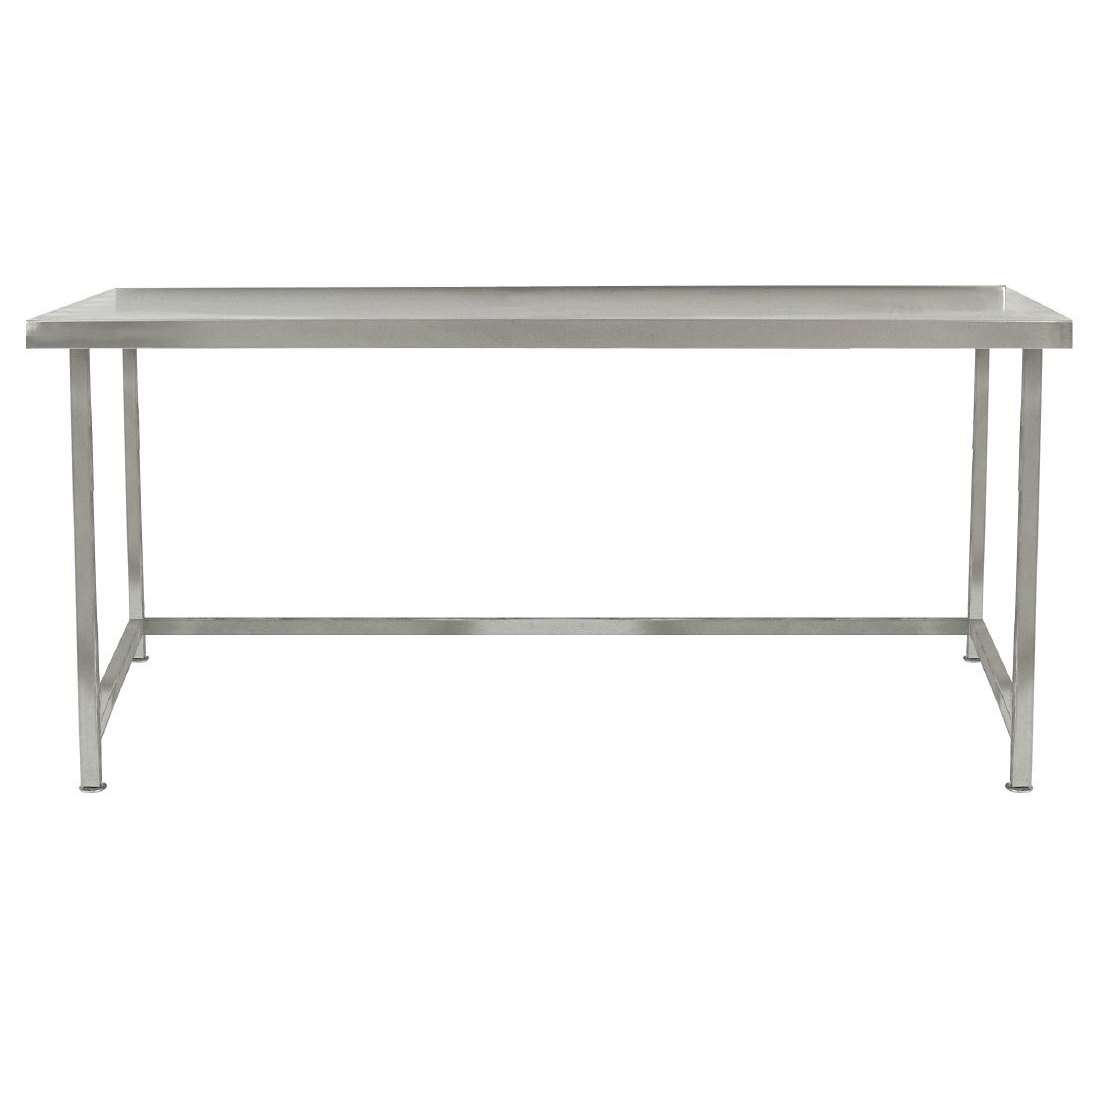 Parry Fully Welded Stainless Steel Centre Table 1200x650mm